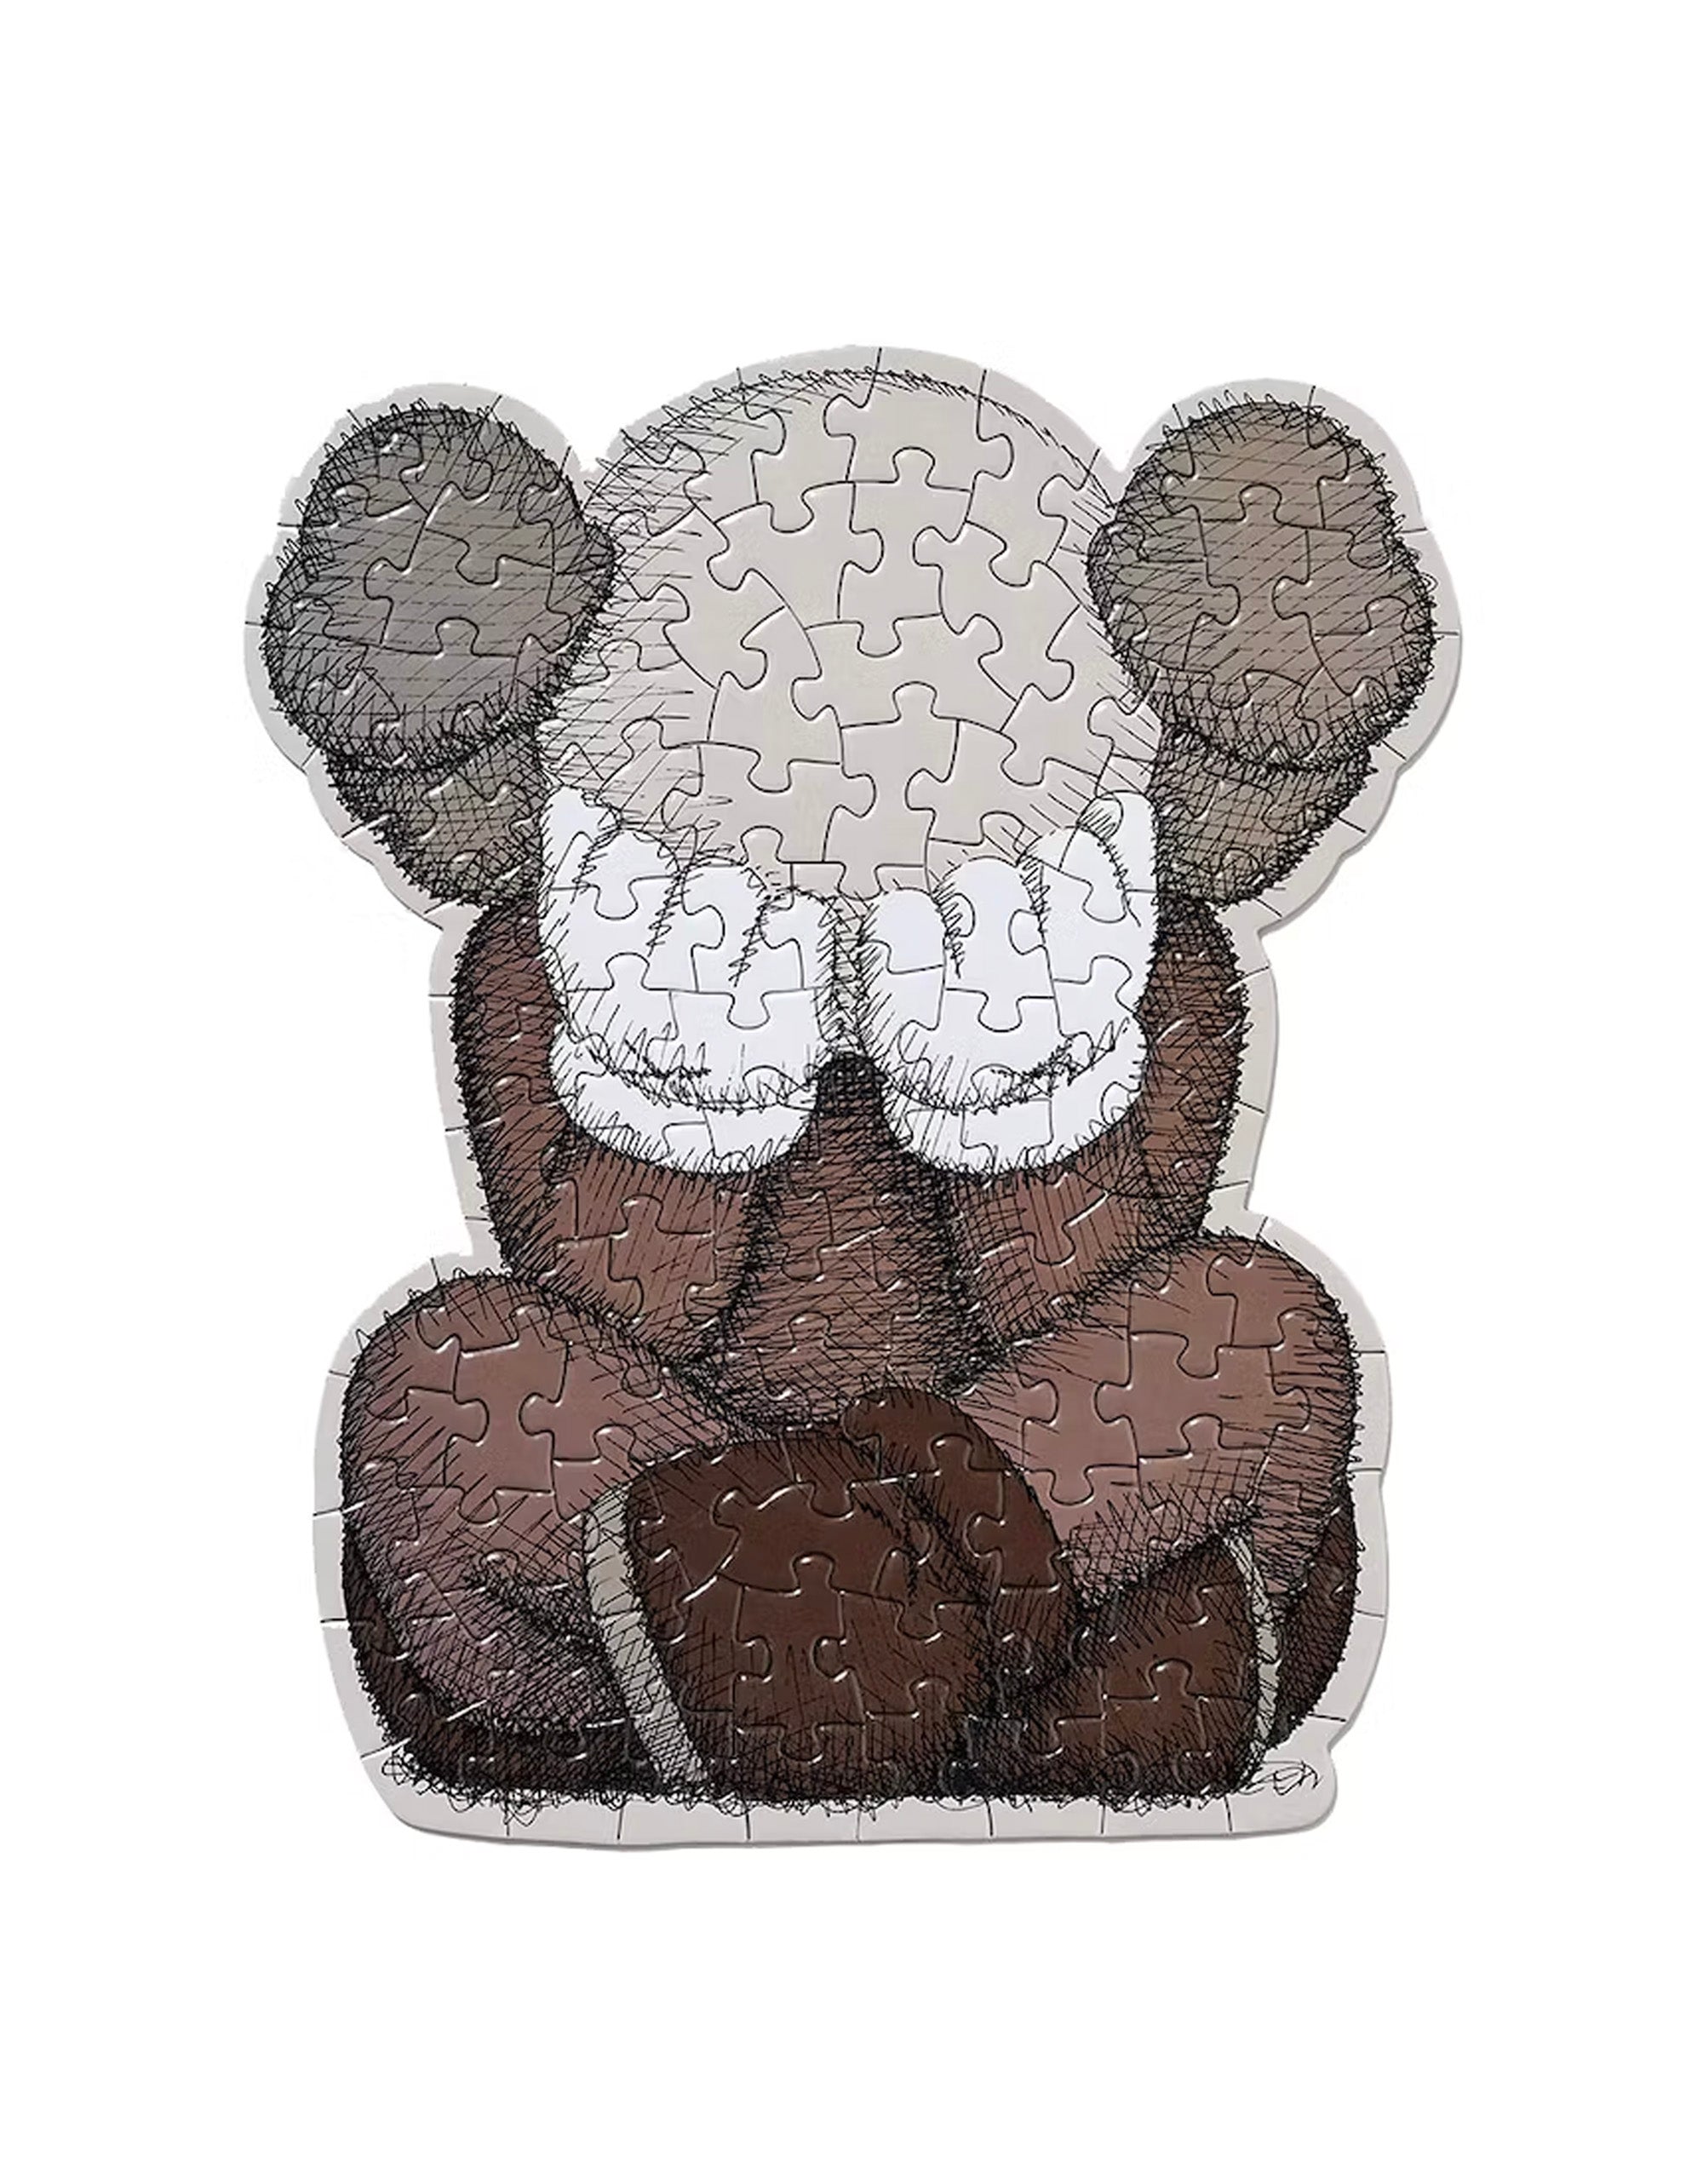 KAWS TOKYO FIRST PUZZLE SEPARATEDカウズ パズル